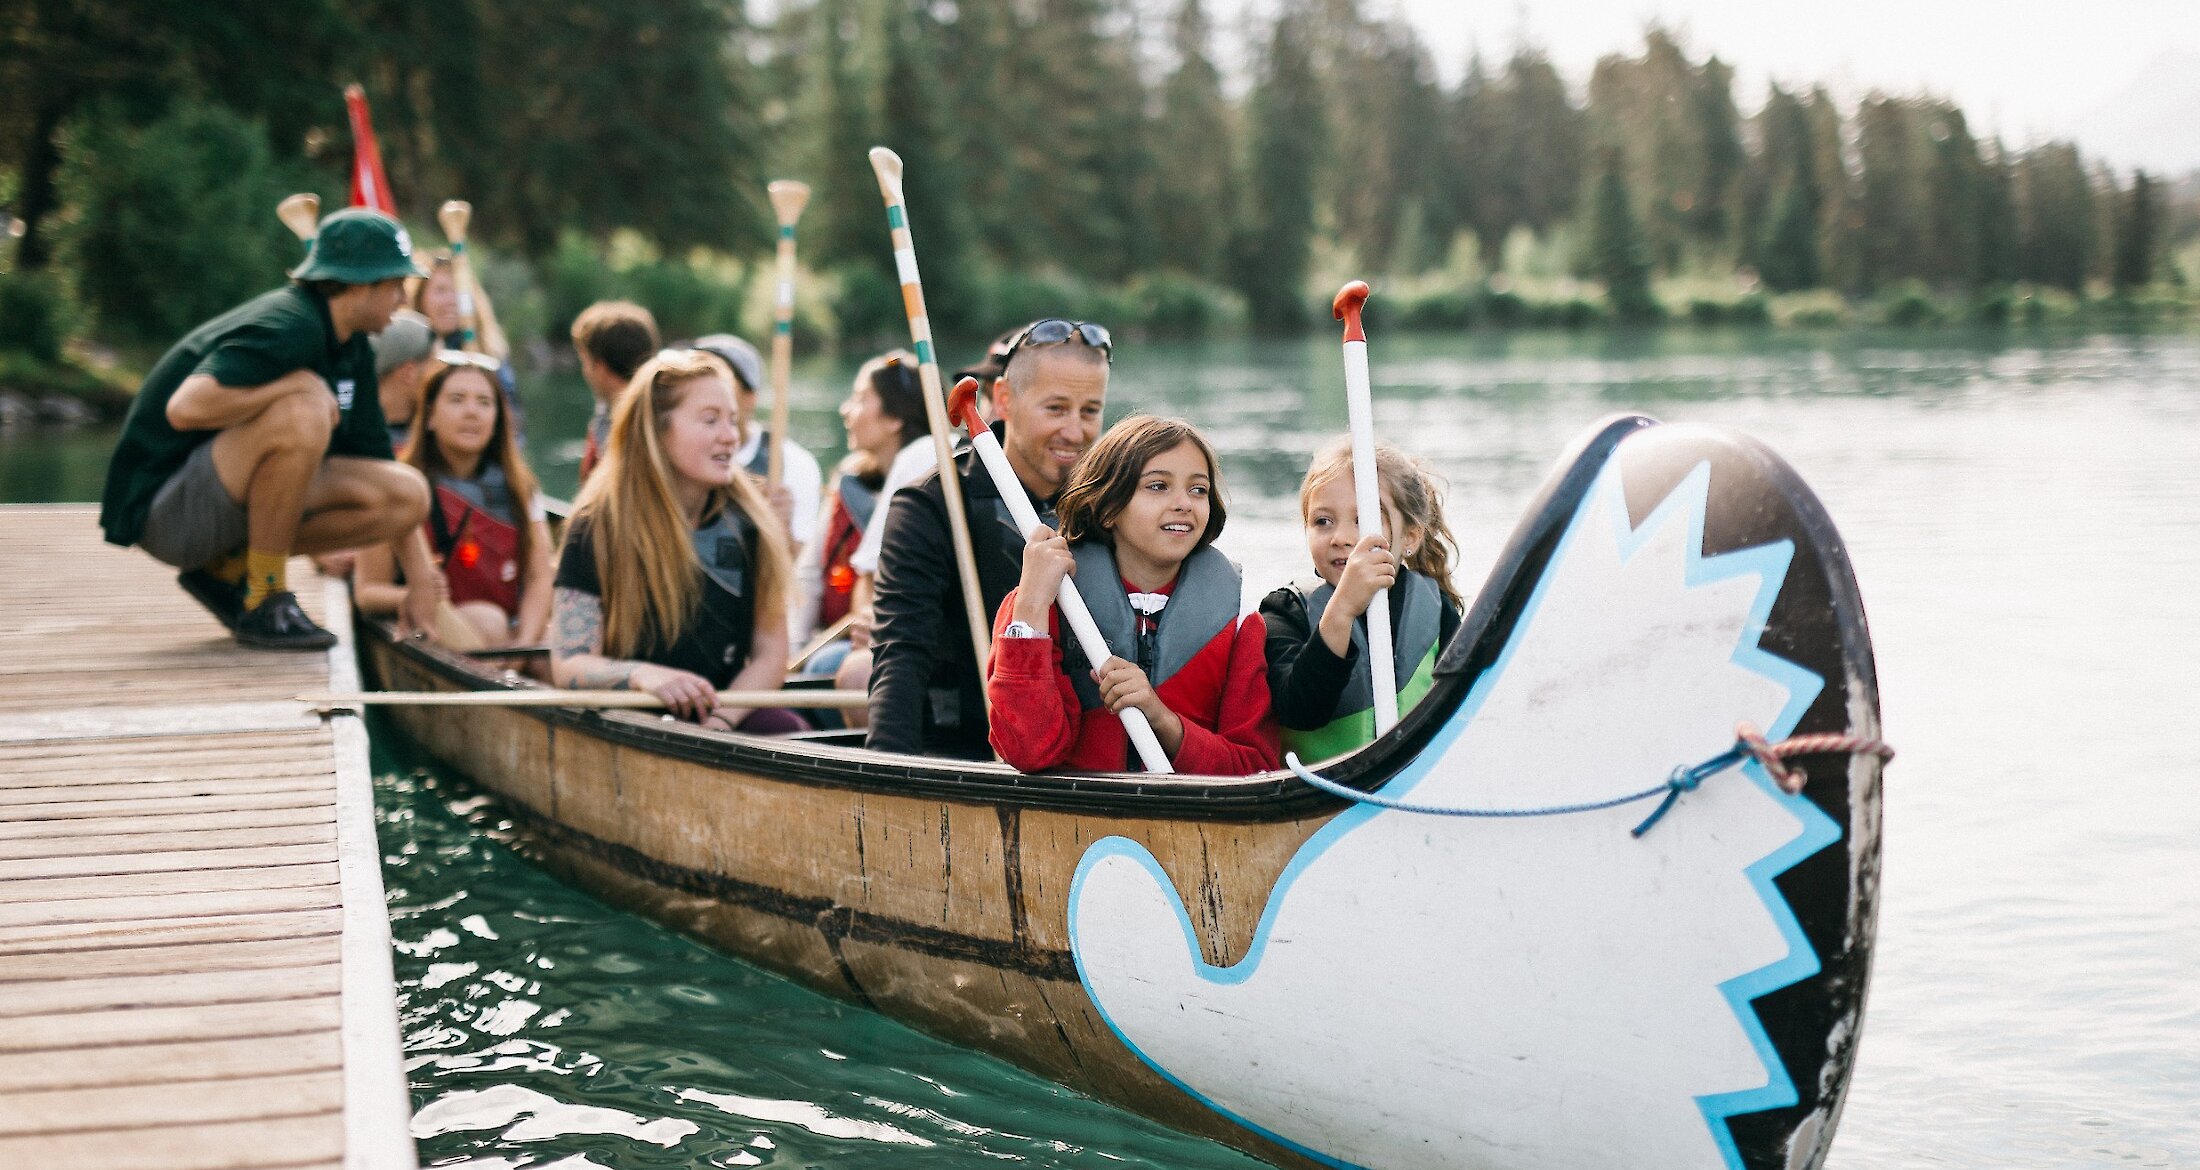 Children with their parents enjoying the Big Canoe Tour in Banff National Park